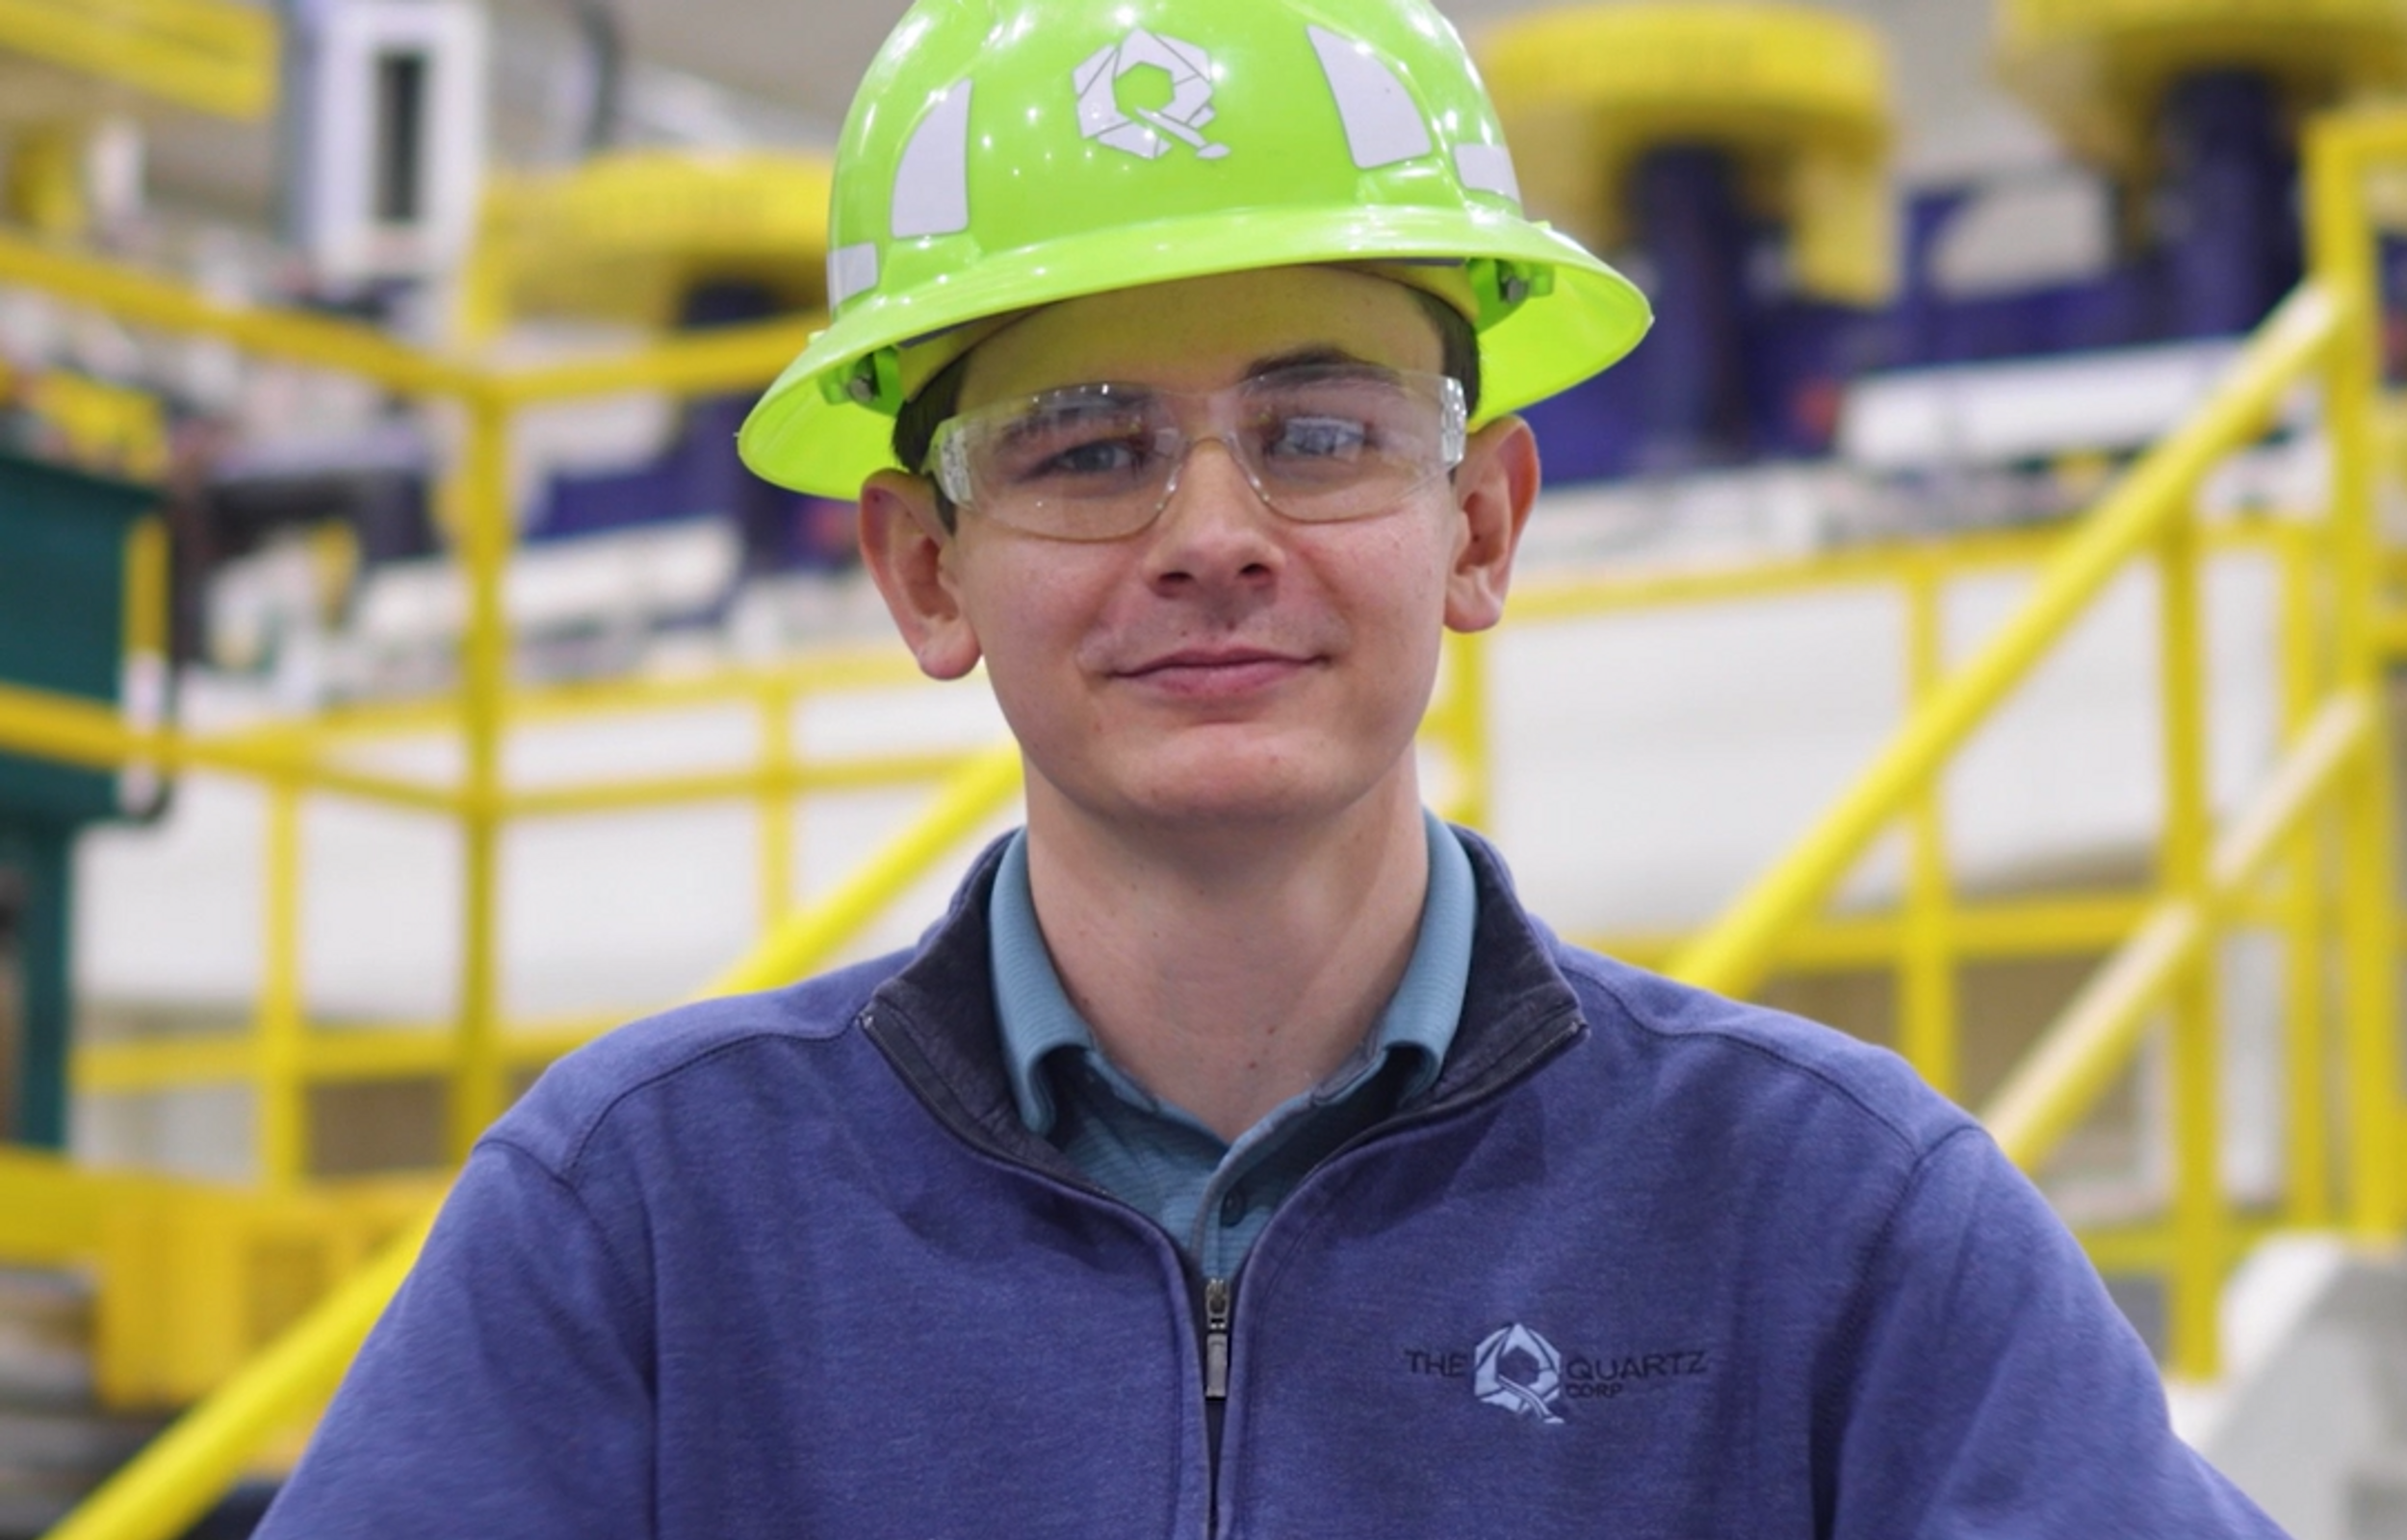 Headshot of a male employee with ppe representing industrial engineering jobs.  